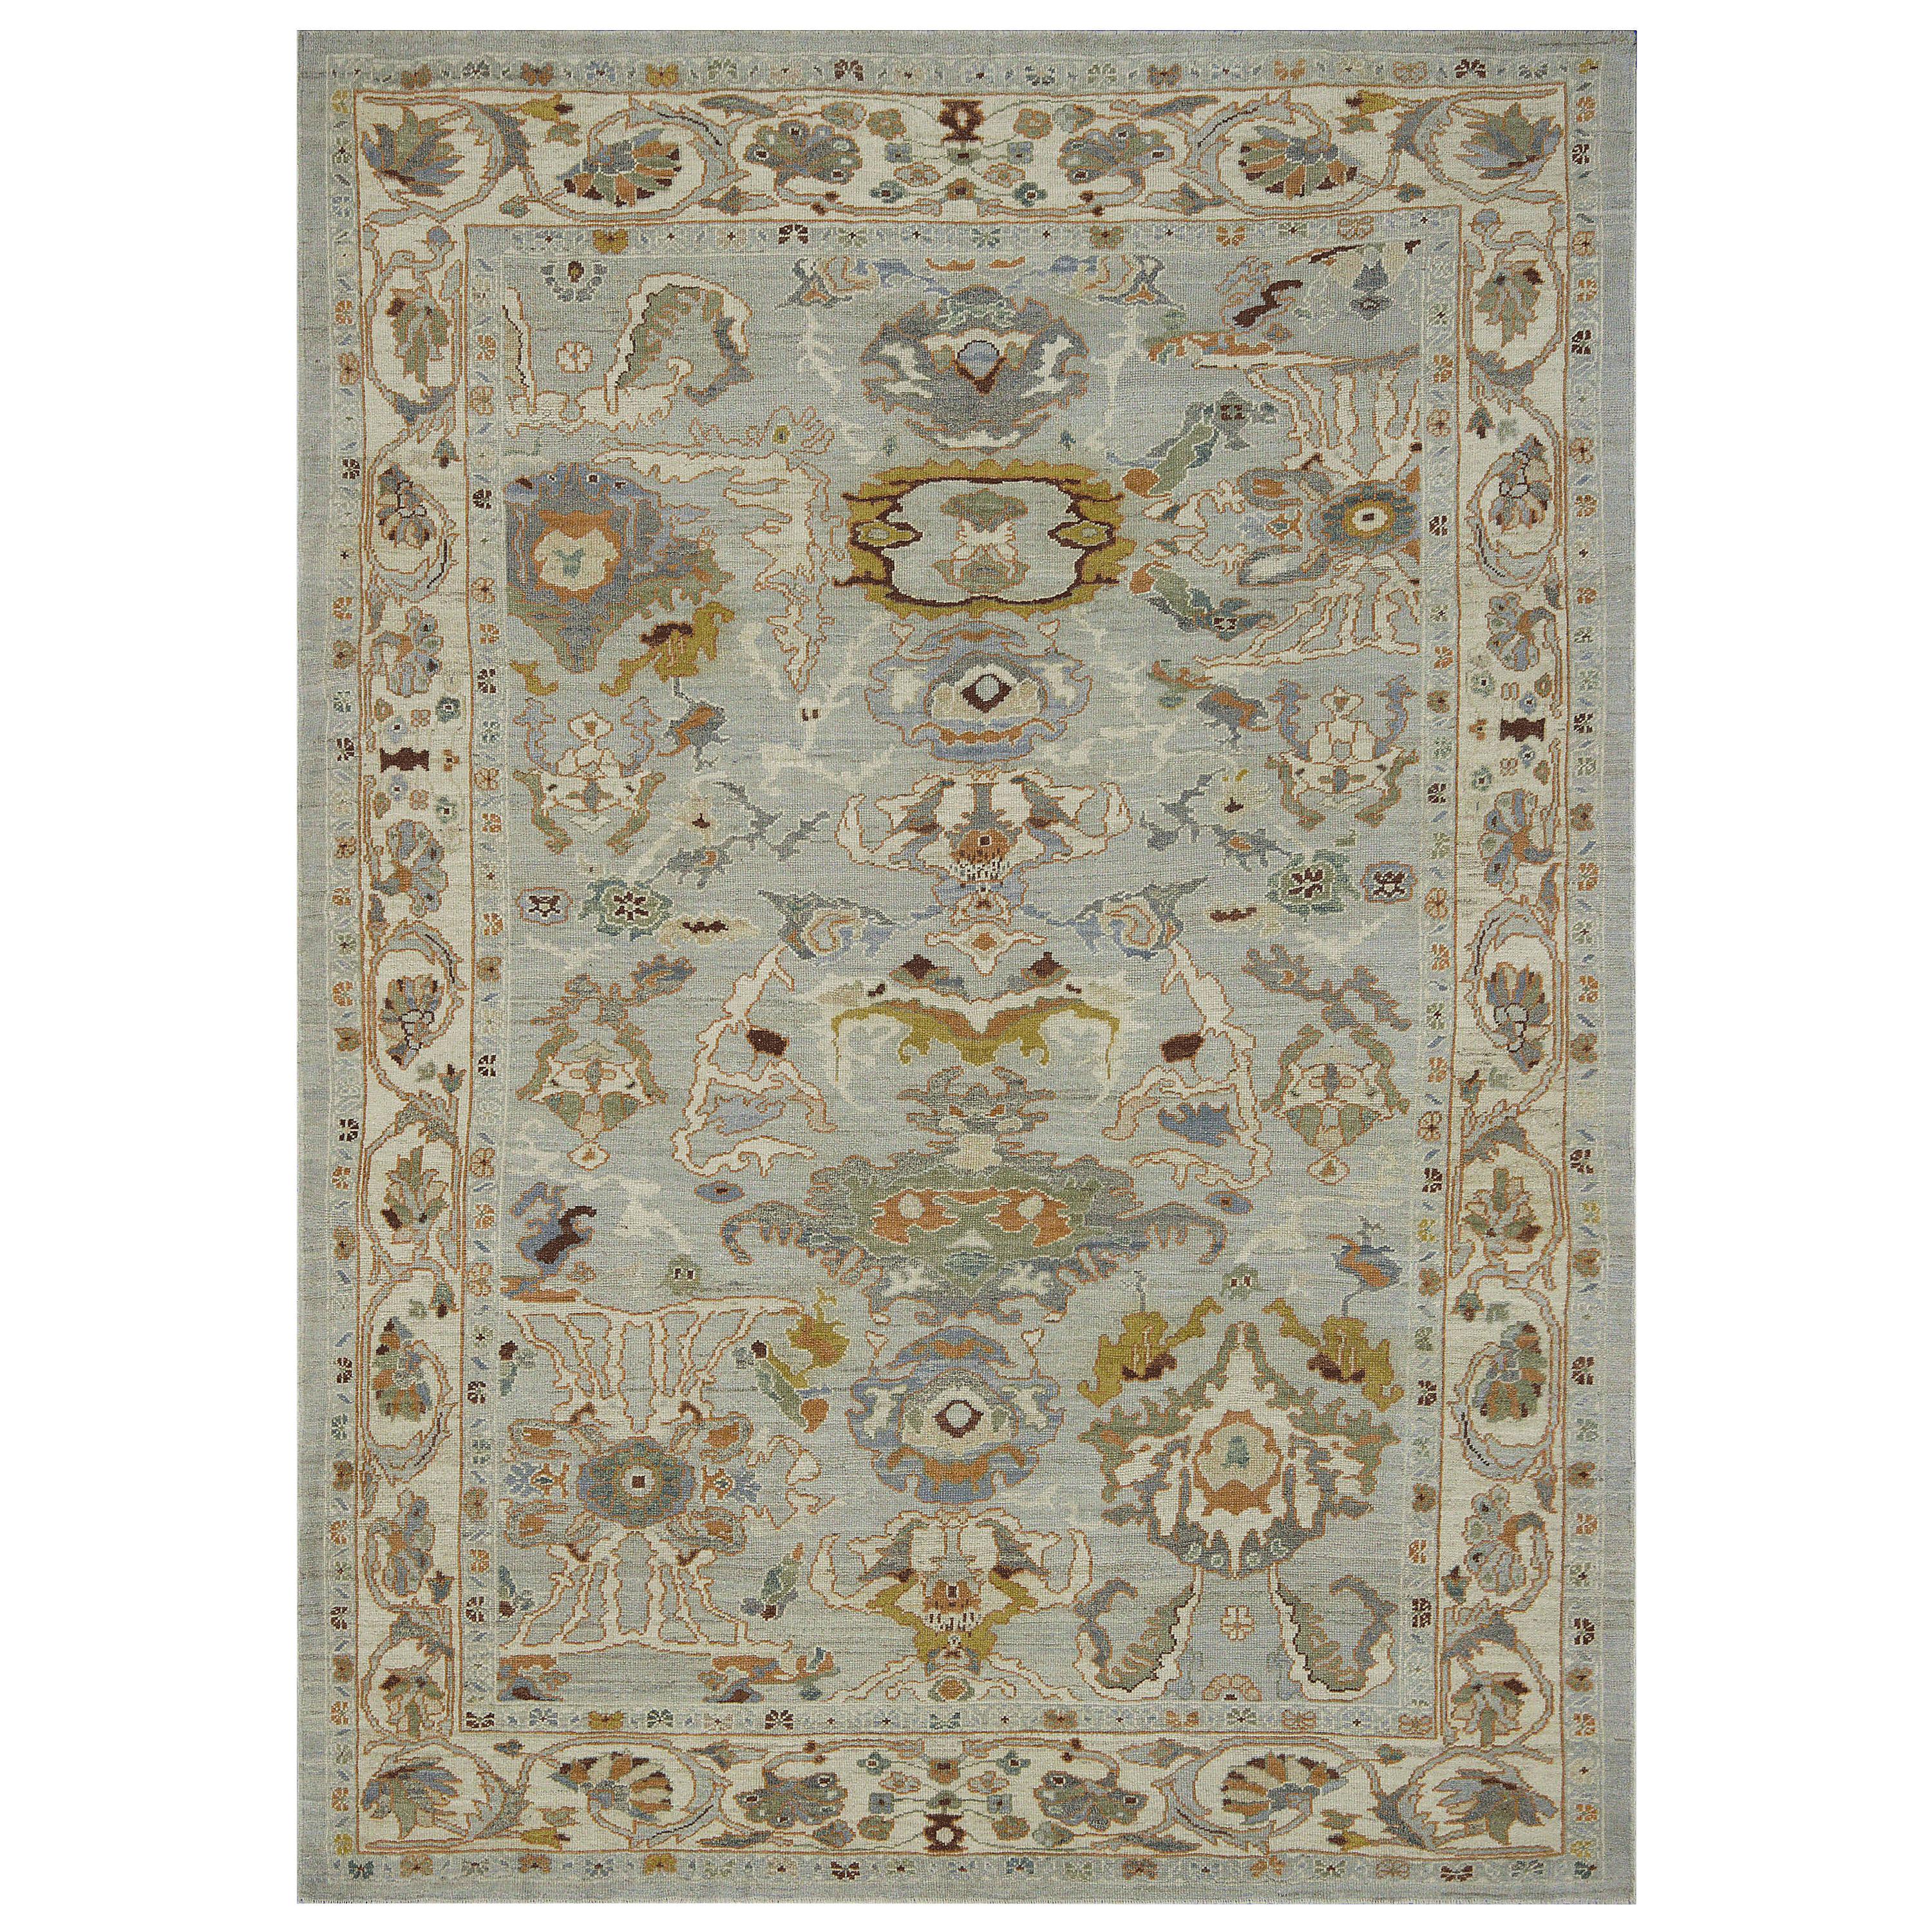 Contemporary Oushak Rug with Floral Patterns in Ivory and Gold on Gray Field